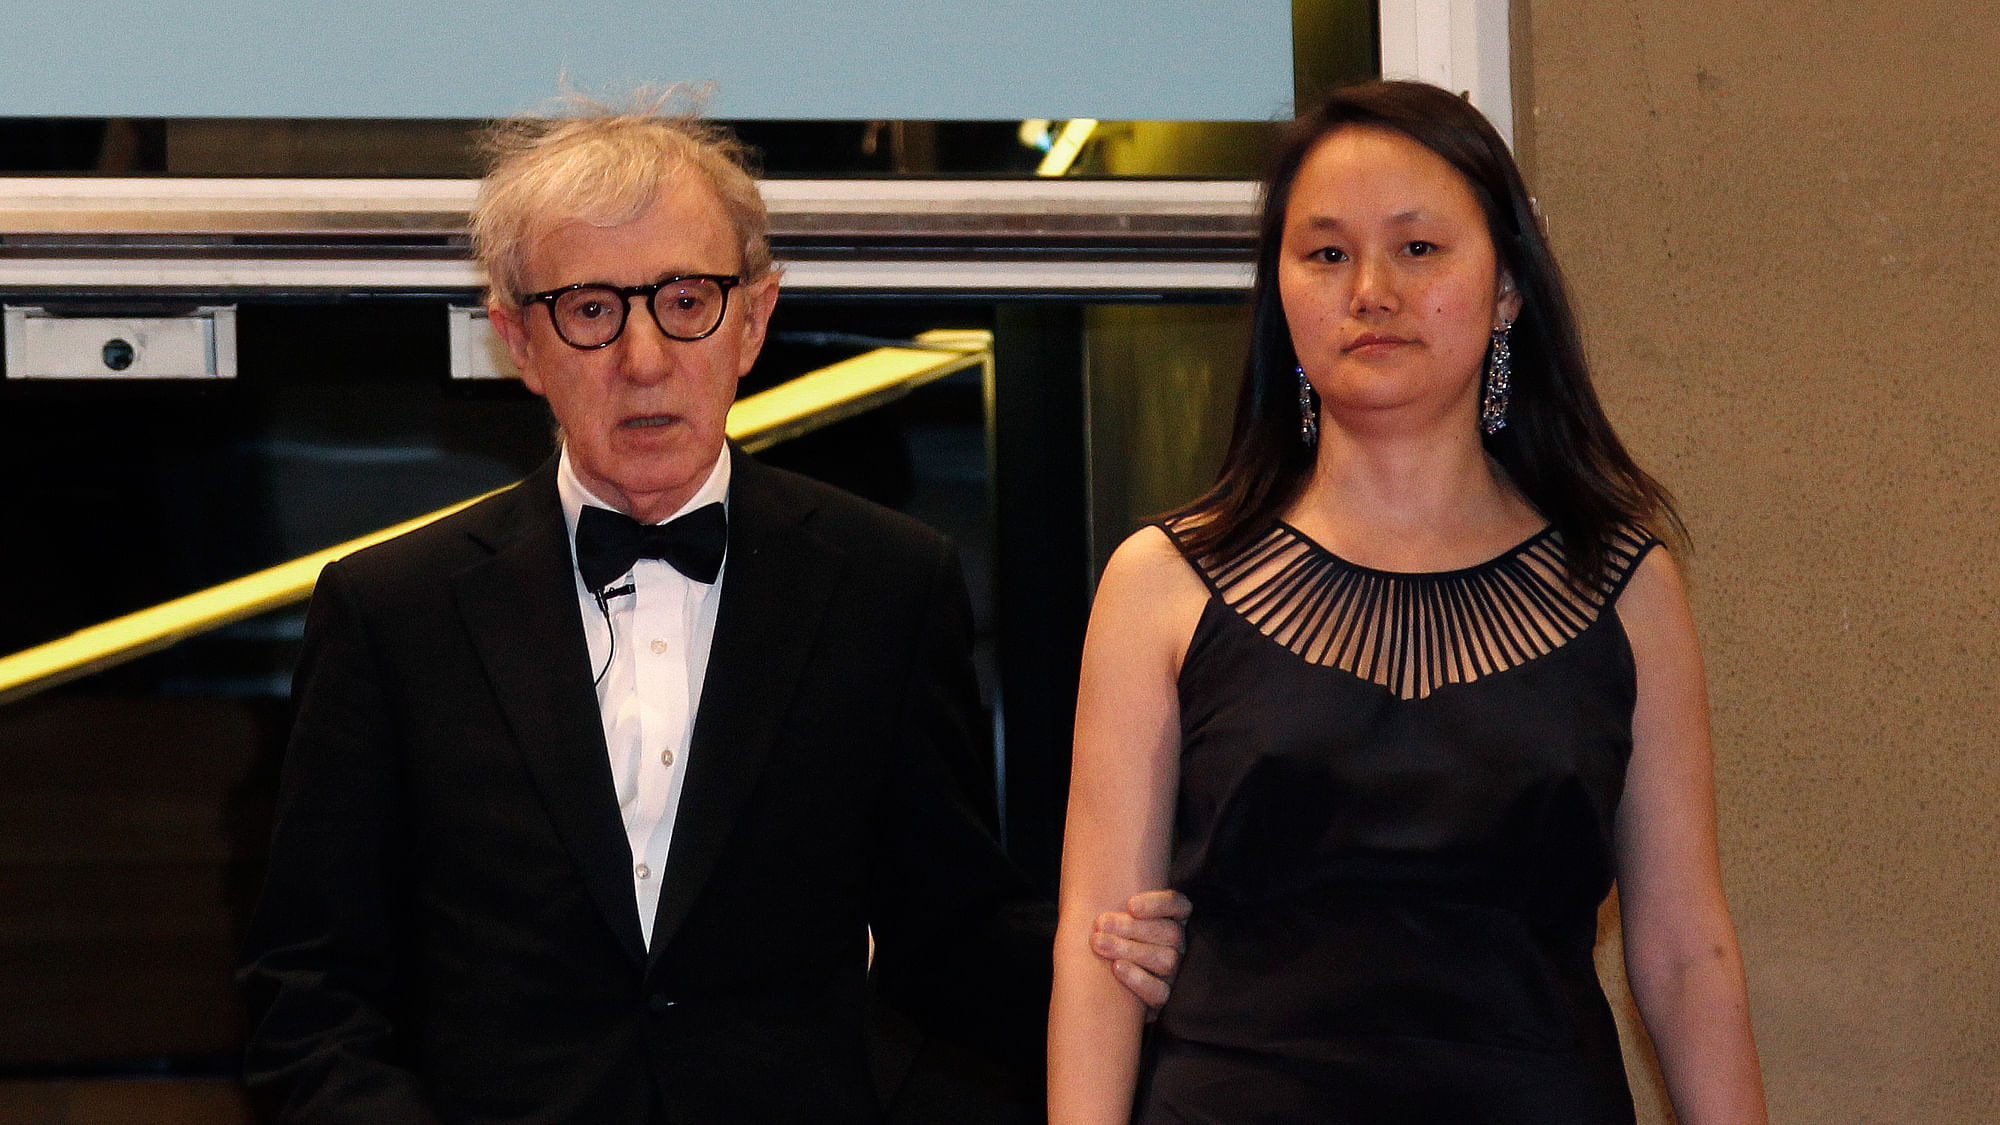  Woody Allen with his current wife Soon-Yi Previn (Photo Courtesy: Reuters)